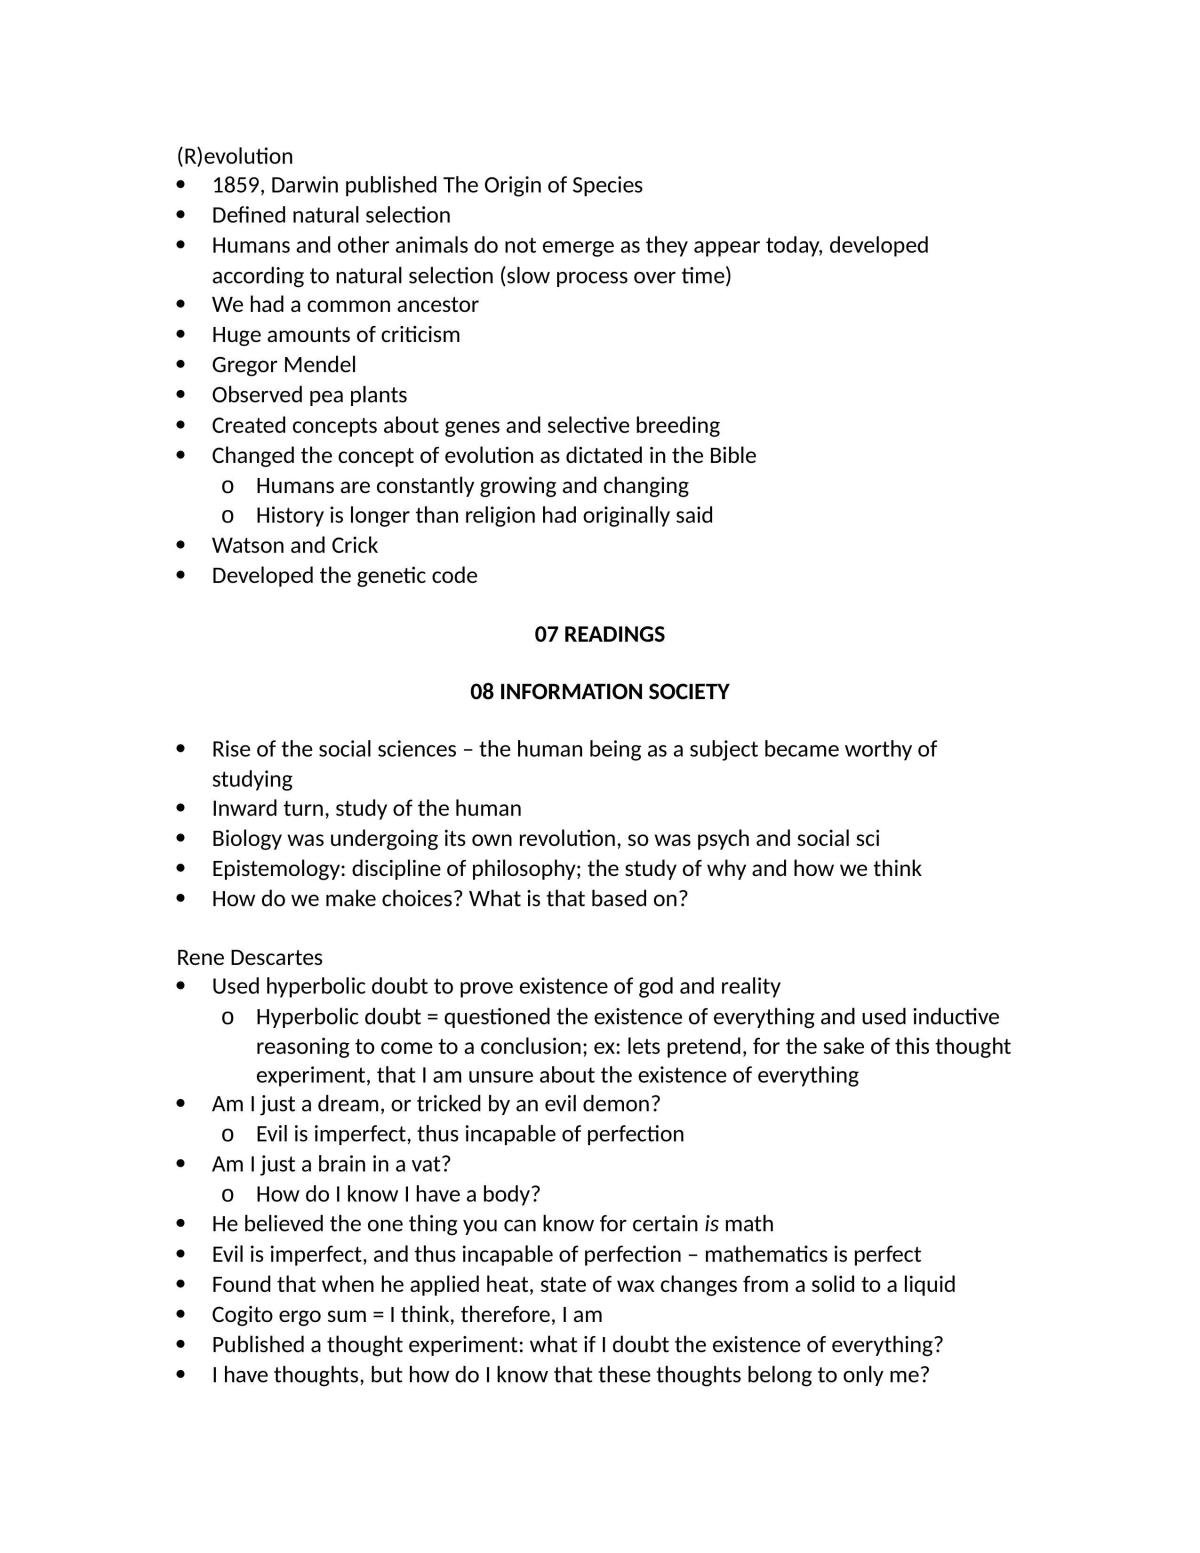 Complete Study Notes - MIT 1700 - Page 22